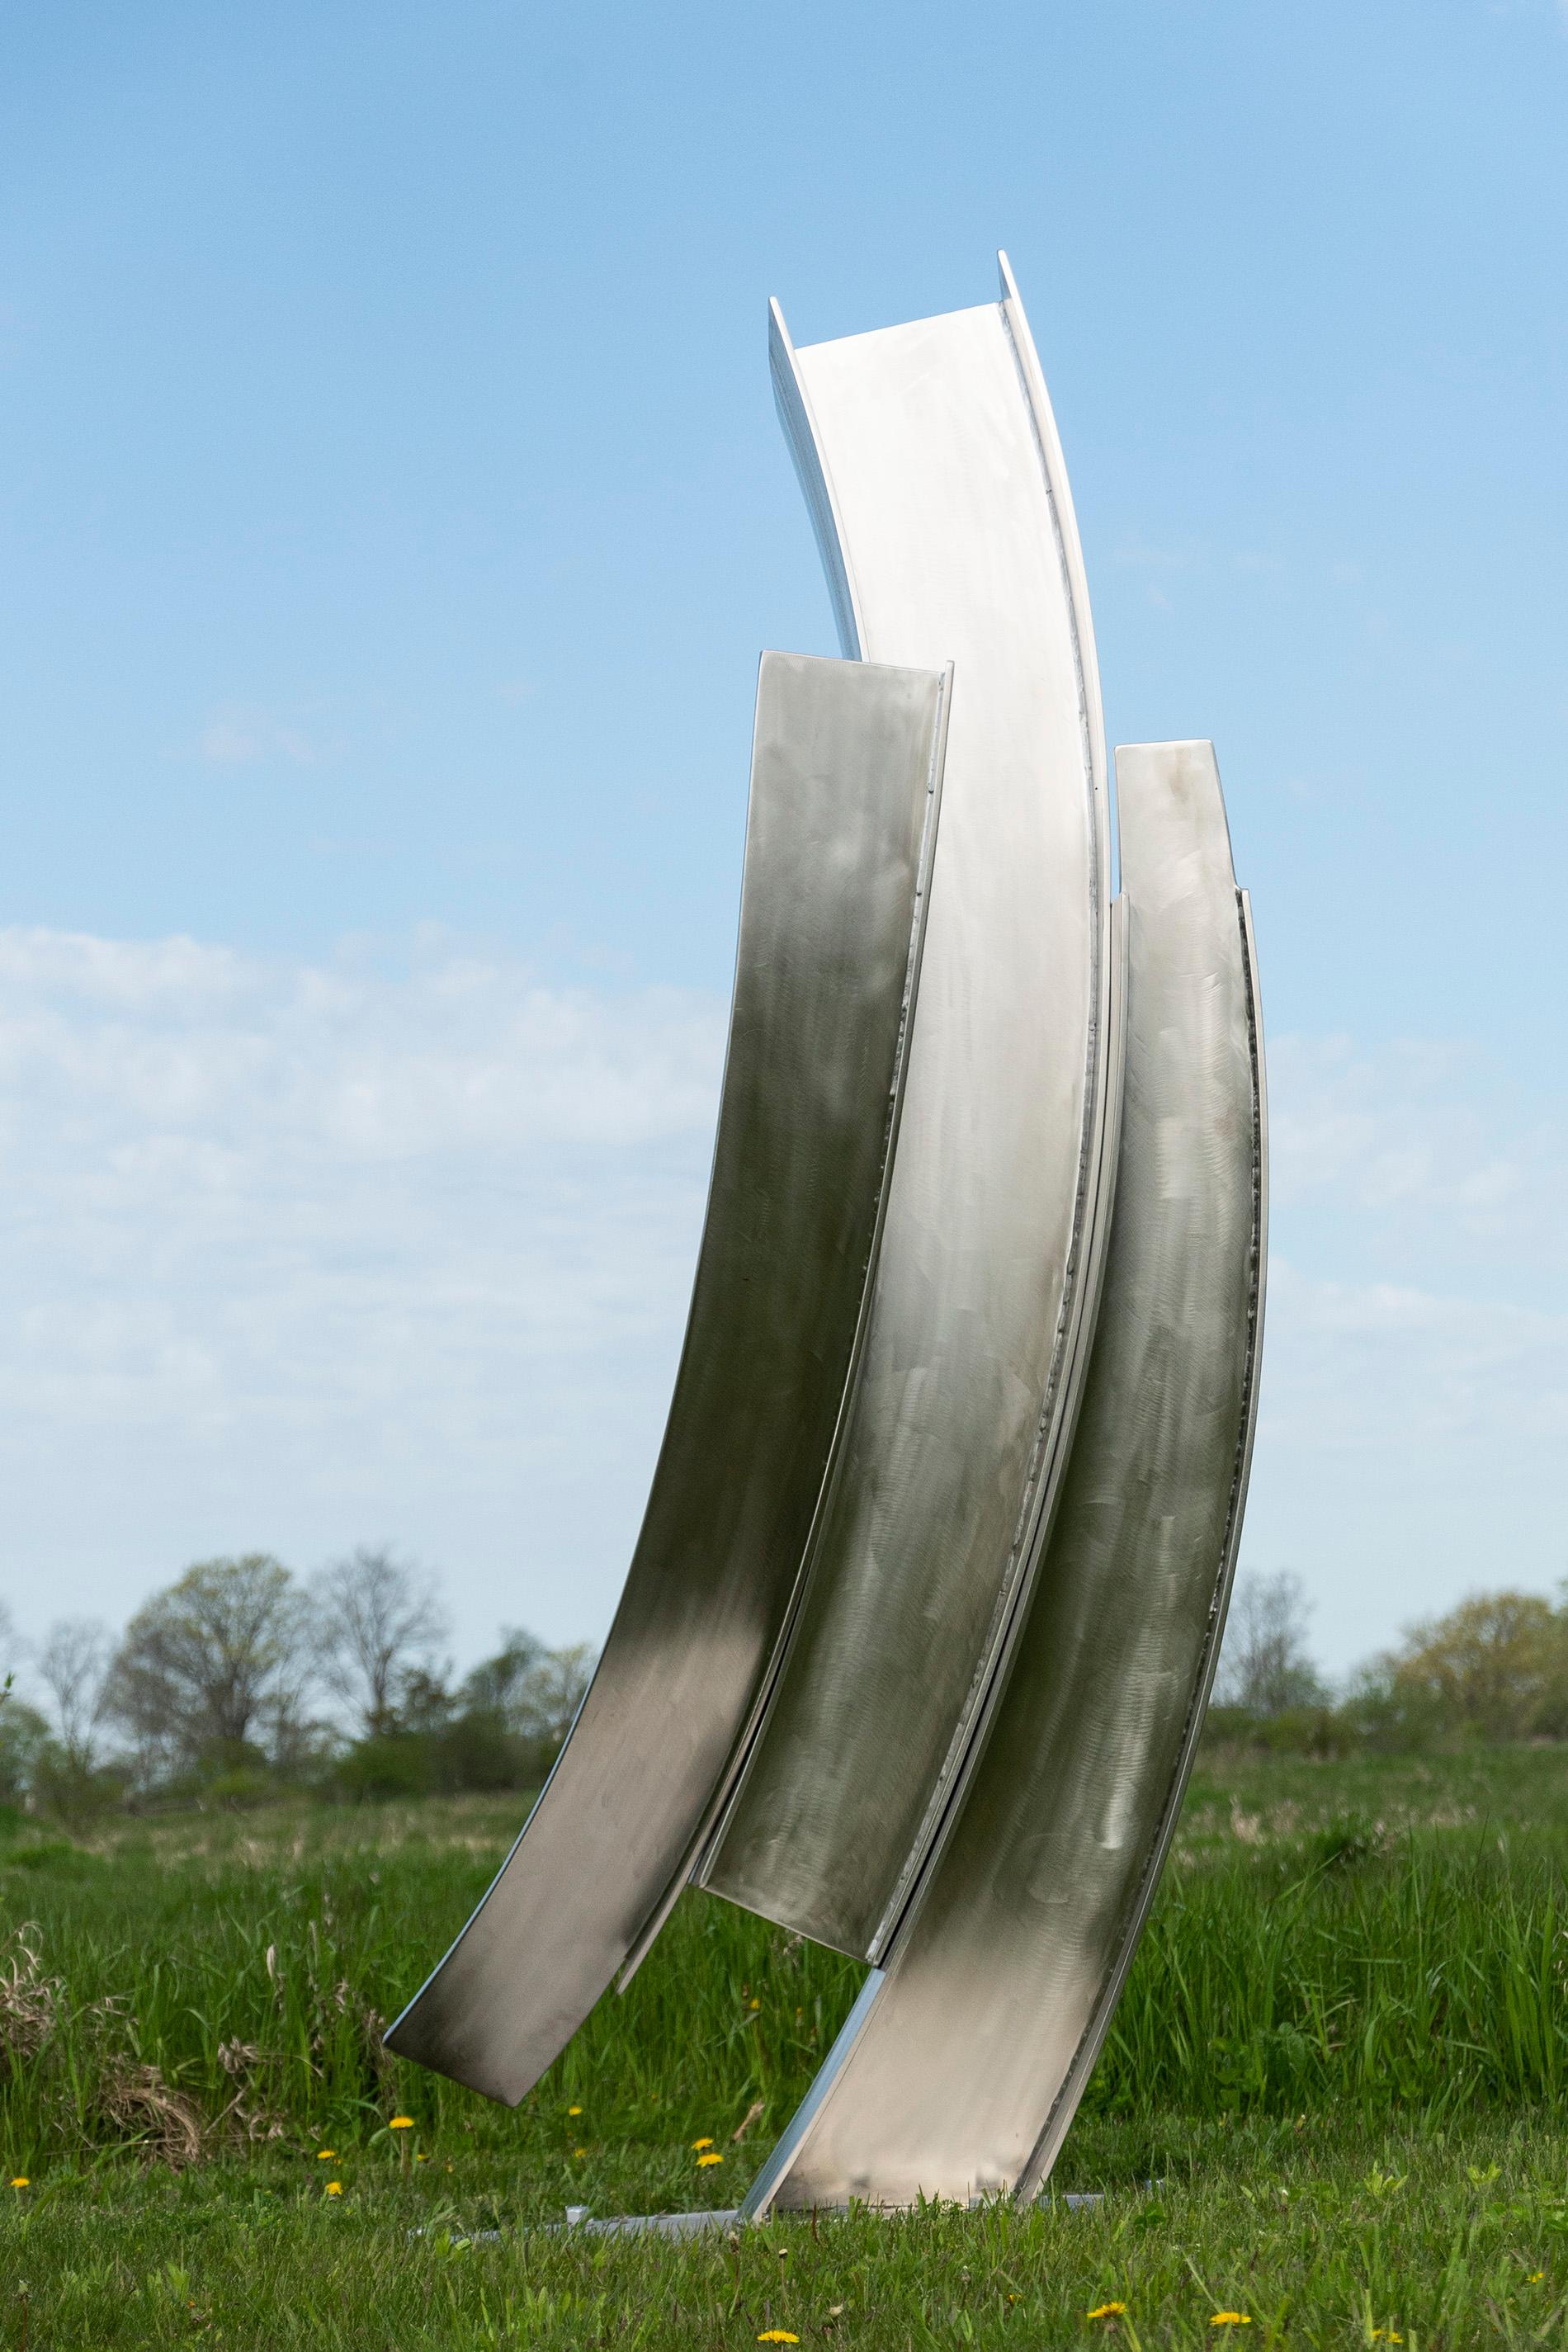 Corpheum XIX - large, geometric, abstract, stainless steel outdoor sculpture - Sculpture by Claude Millette